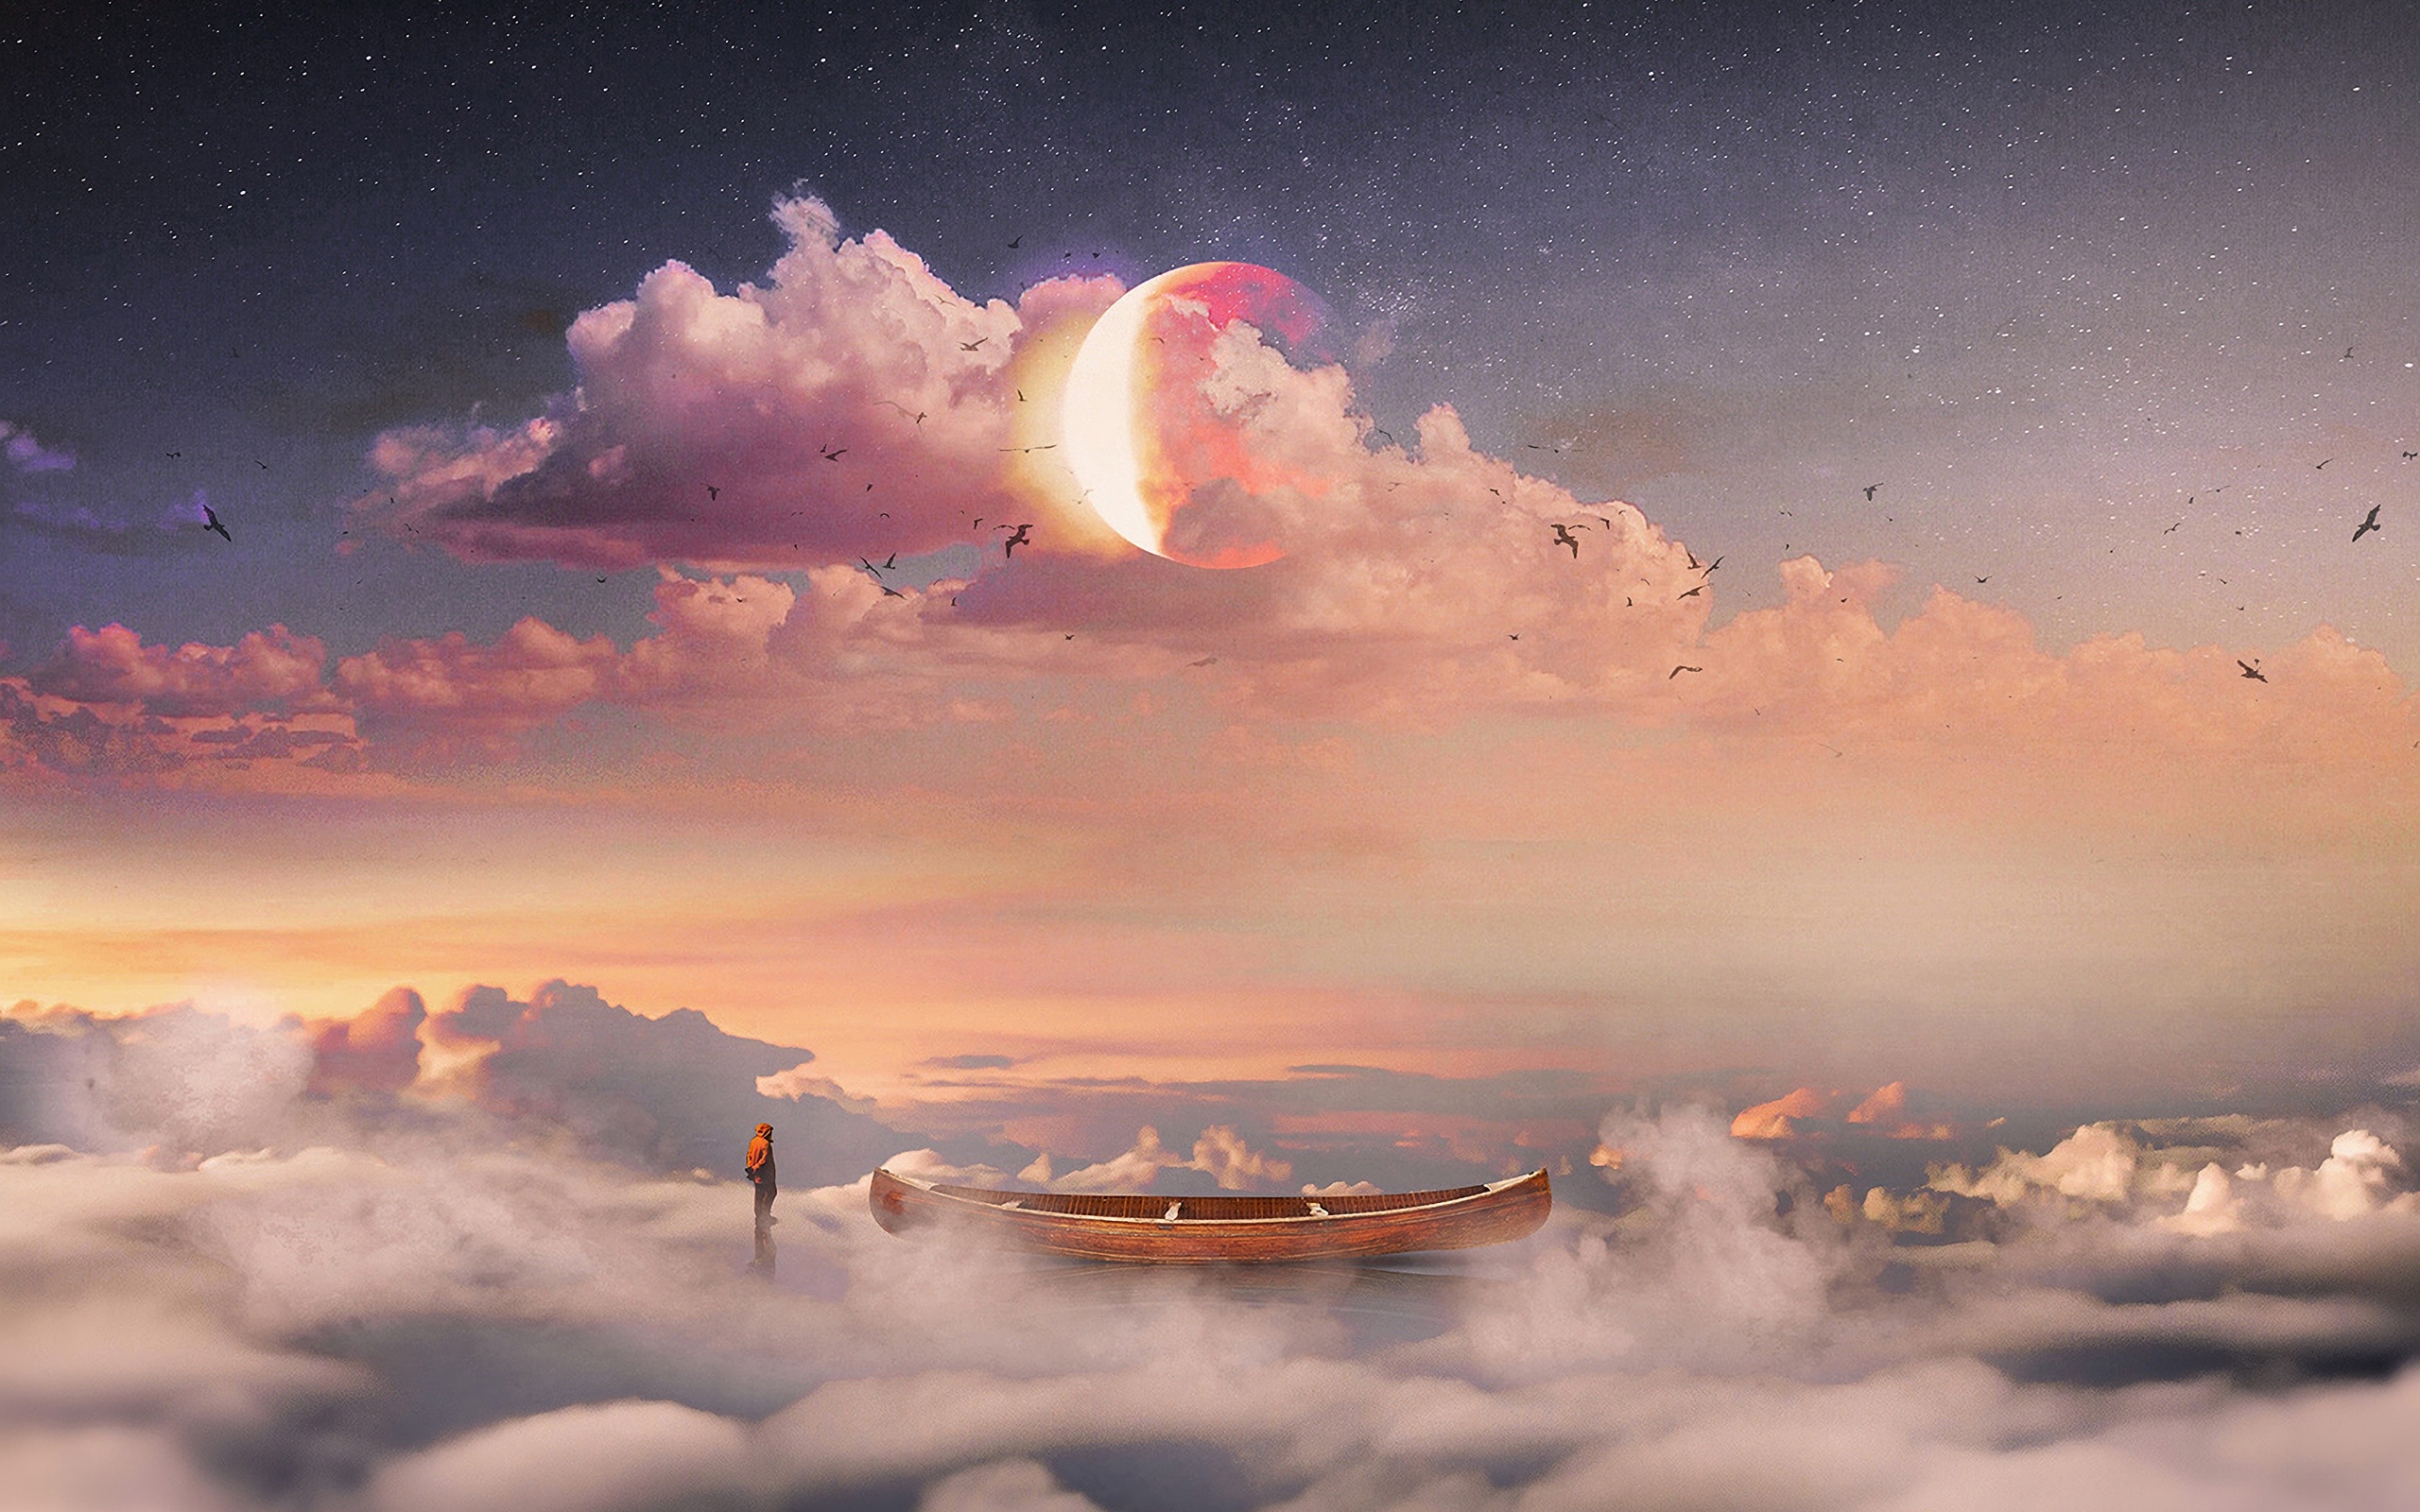 Fantasy art, Boat in space, Planets and stars, Magical fantasy, Animal art, 2560x1600 HD Desktop